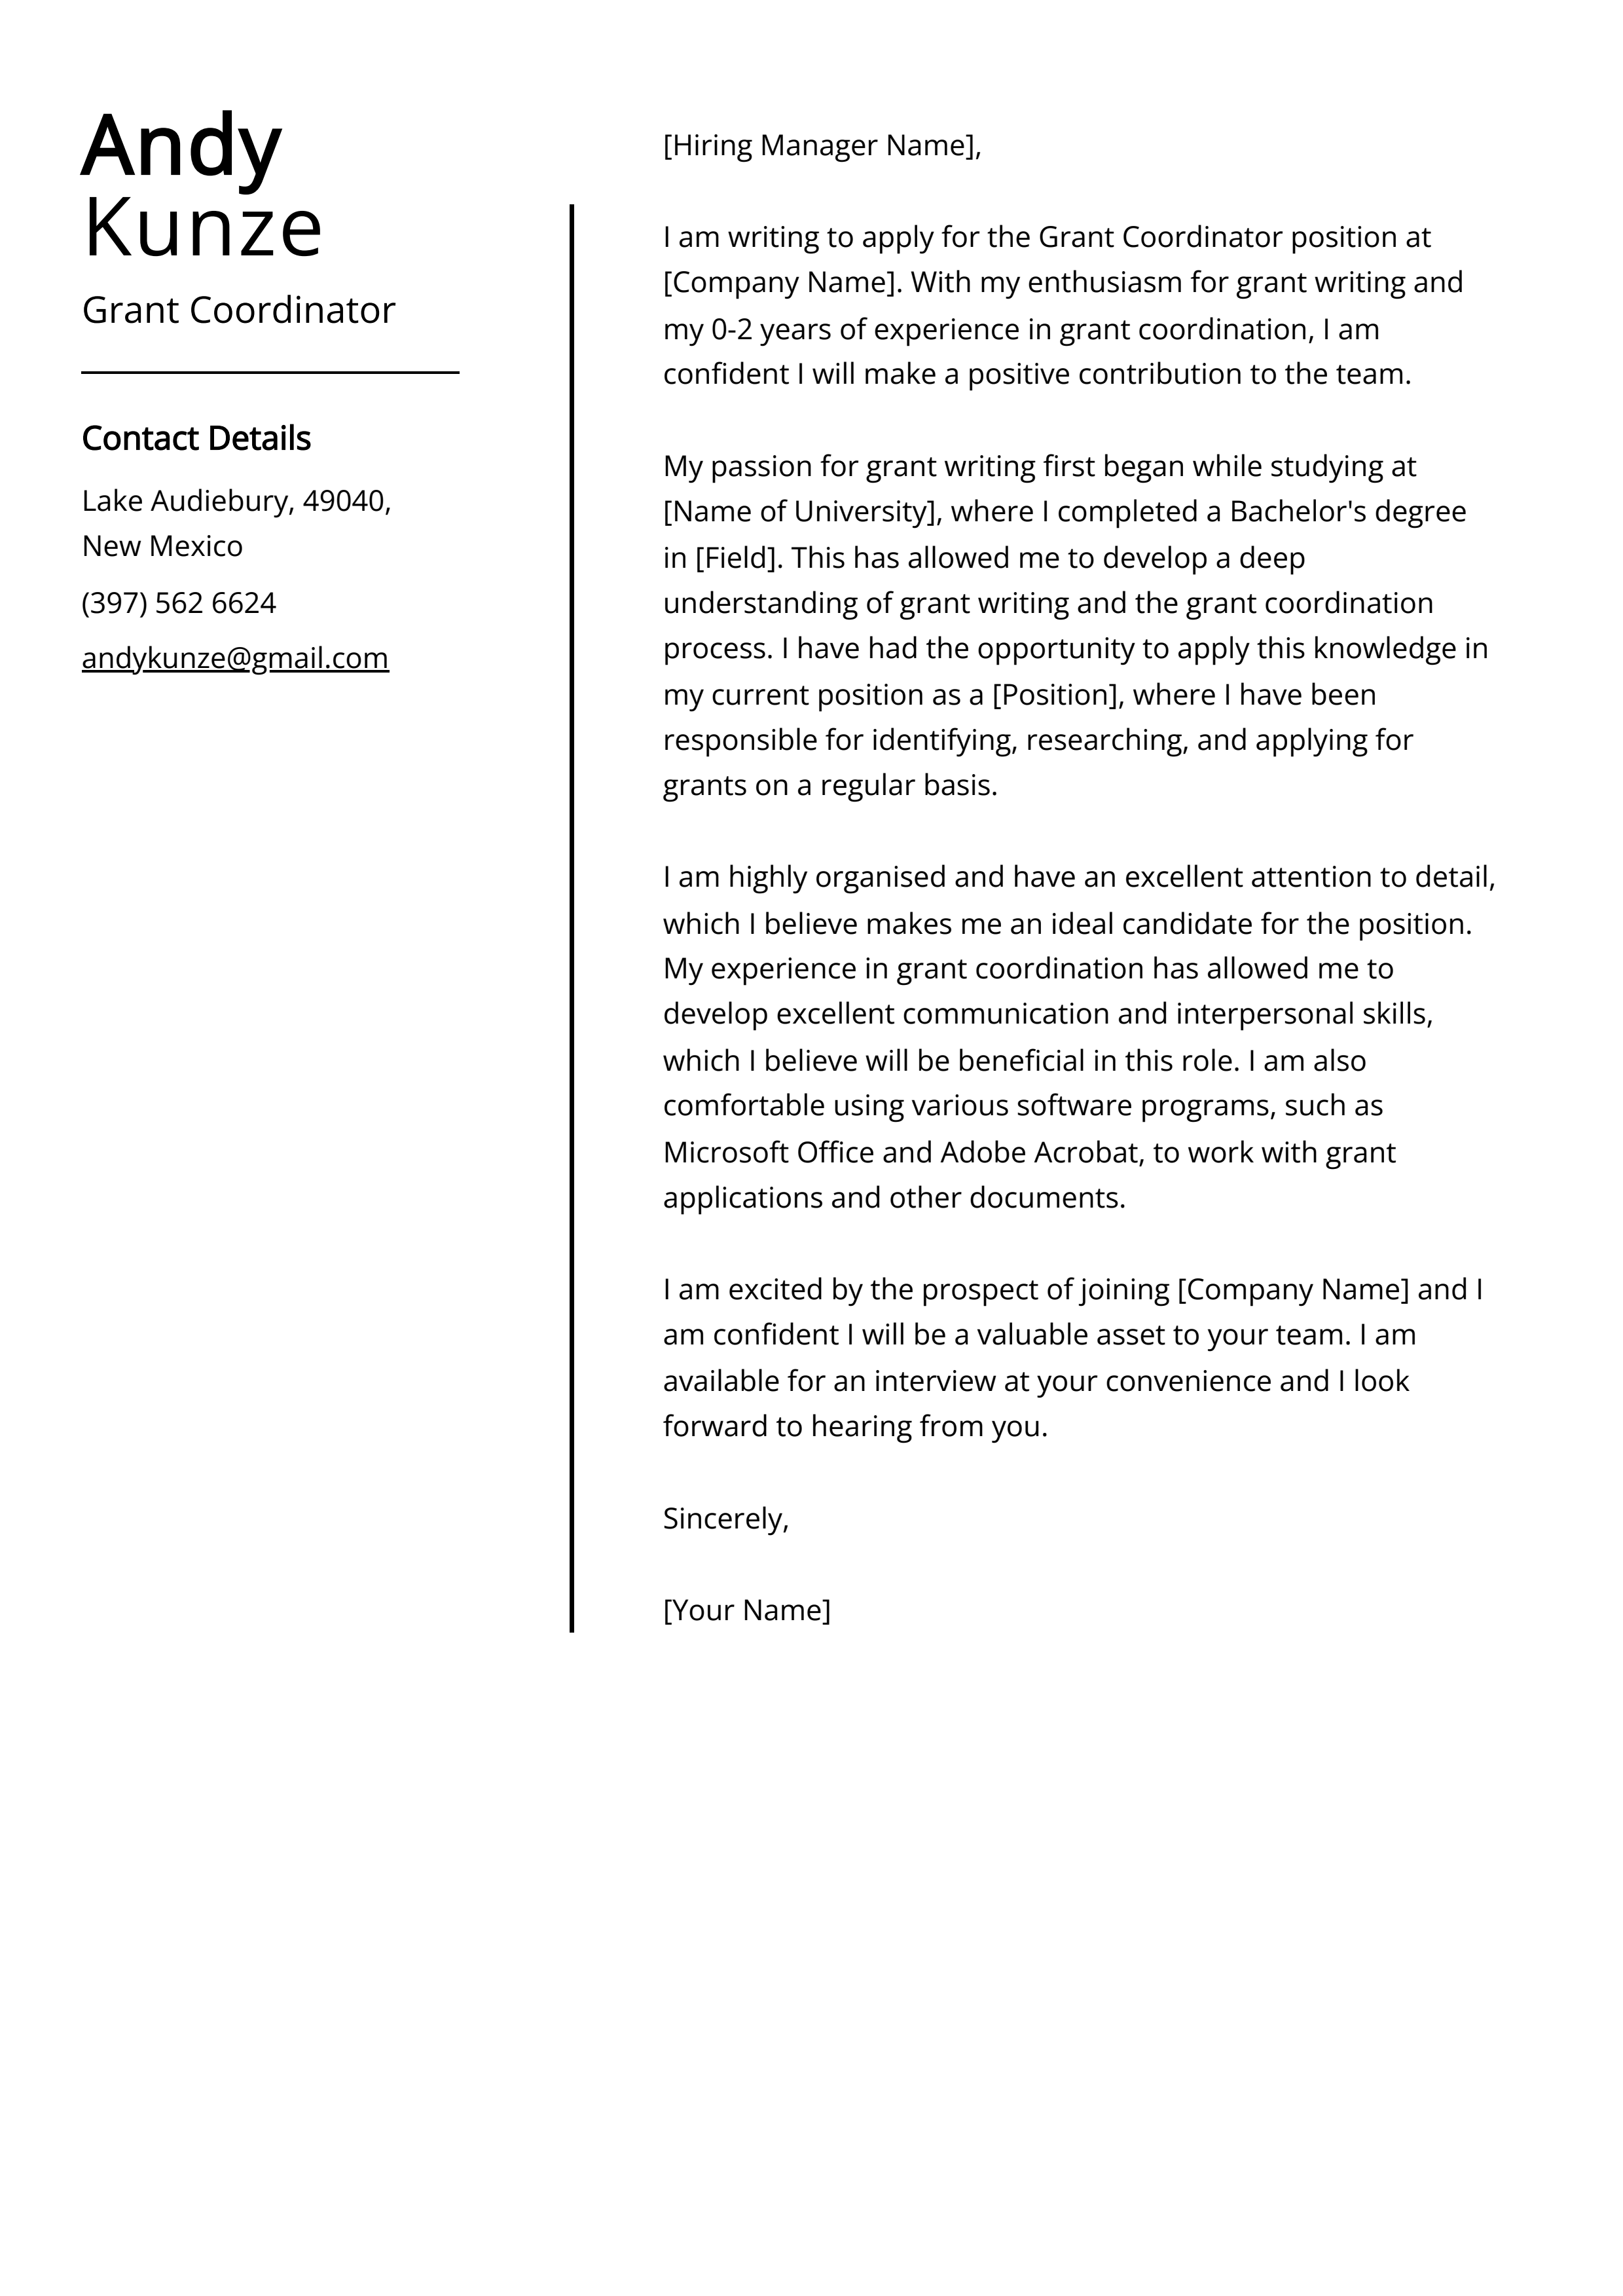 Grant Coordinator Cover Letter Example